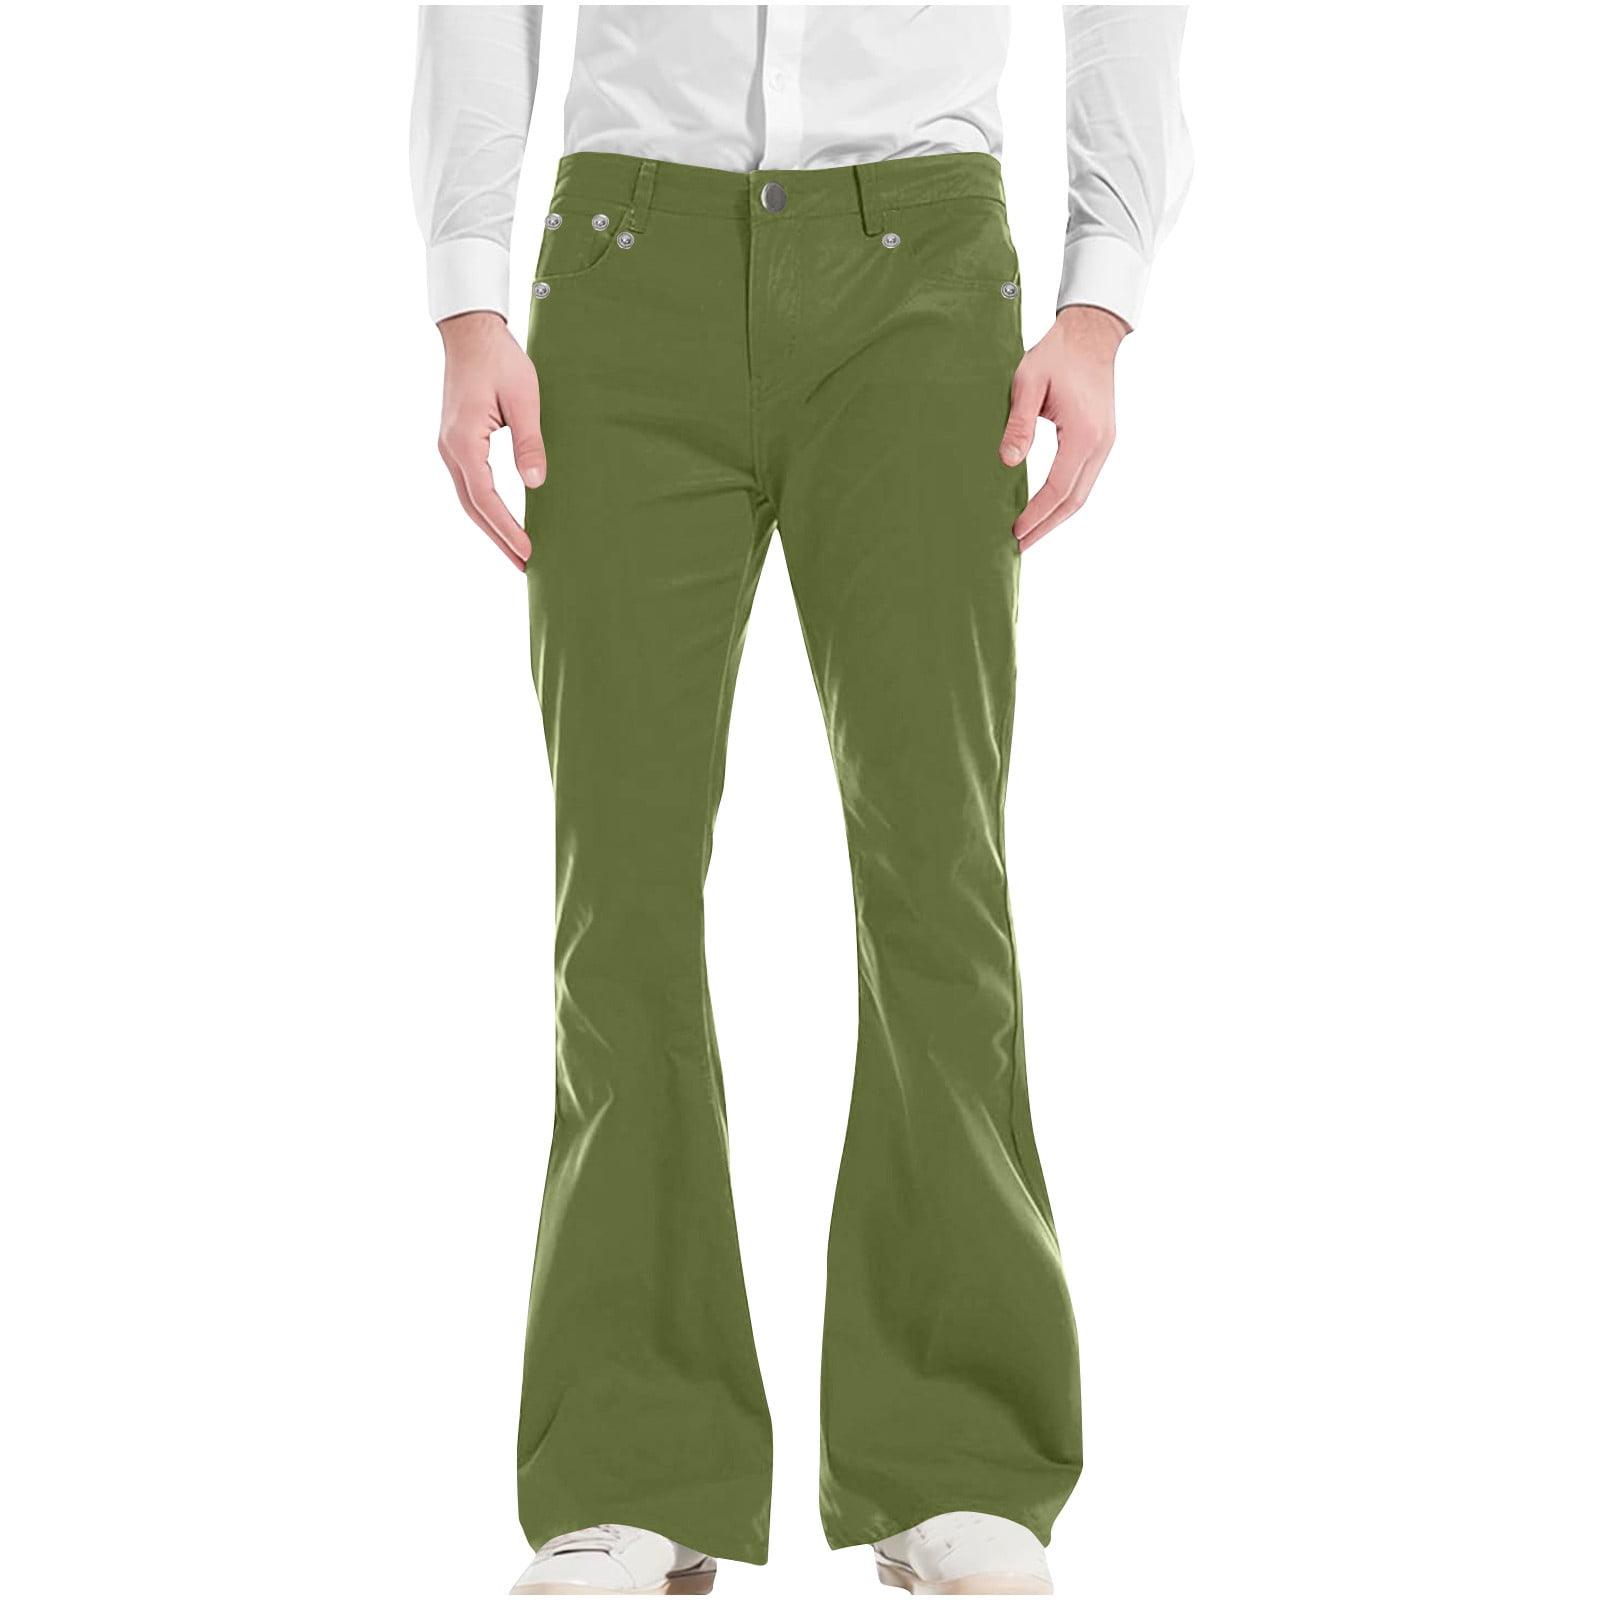 AherBiu Mens Vintage Flare Pants High Waisted Solid Color Retro